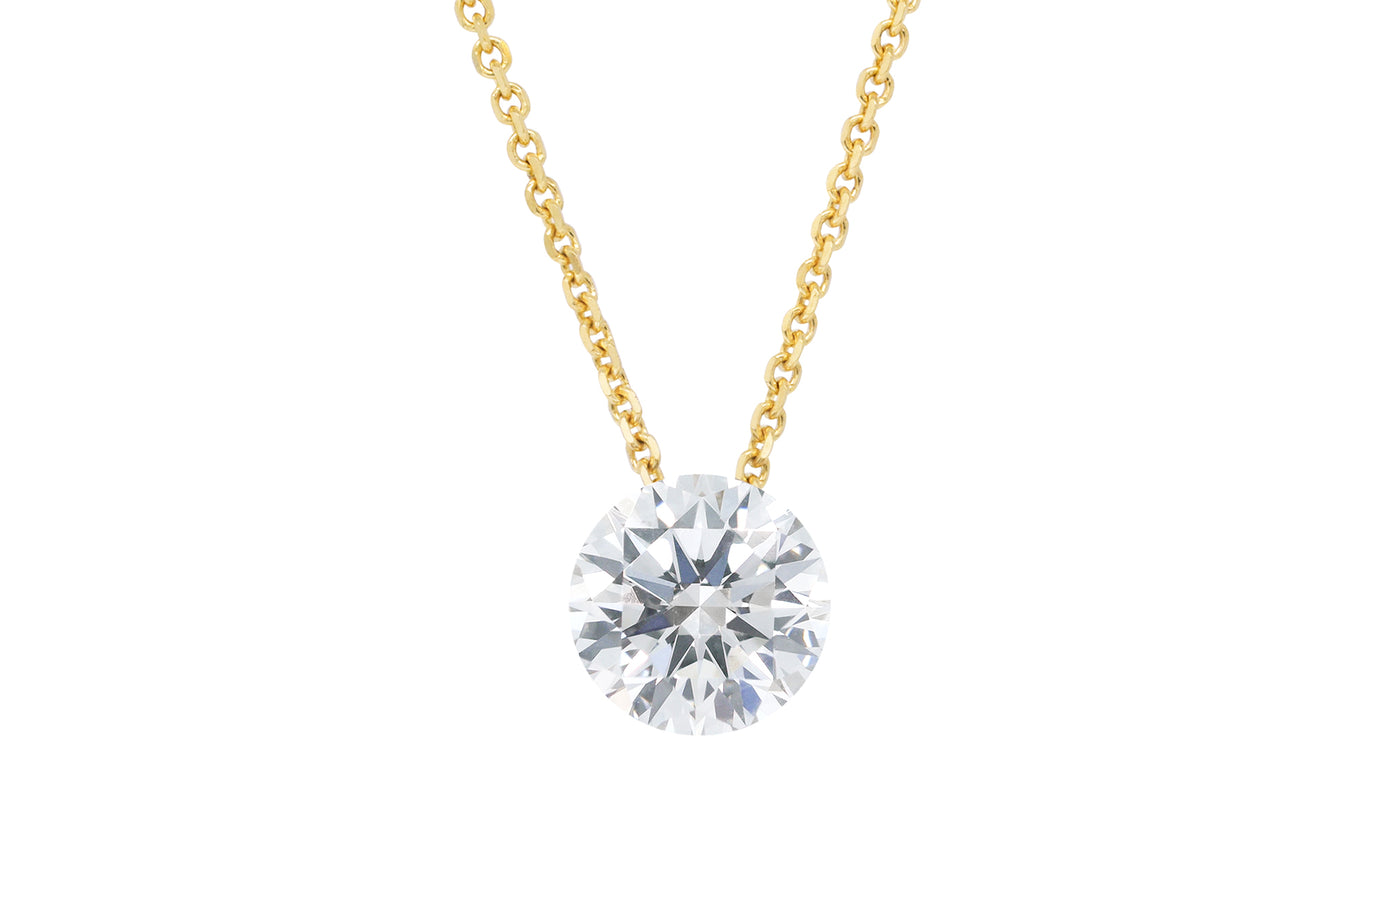 Floeting, Diamond, floating, no clasps, no claw, clawless, clasp less, titanium collet, setting, innovation, brilliant cut, round cut, 18k, 18ct, yellow gold chain, pendant, floeting solitaire